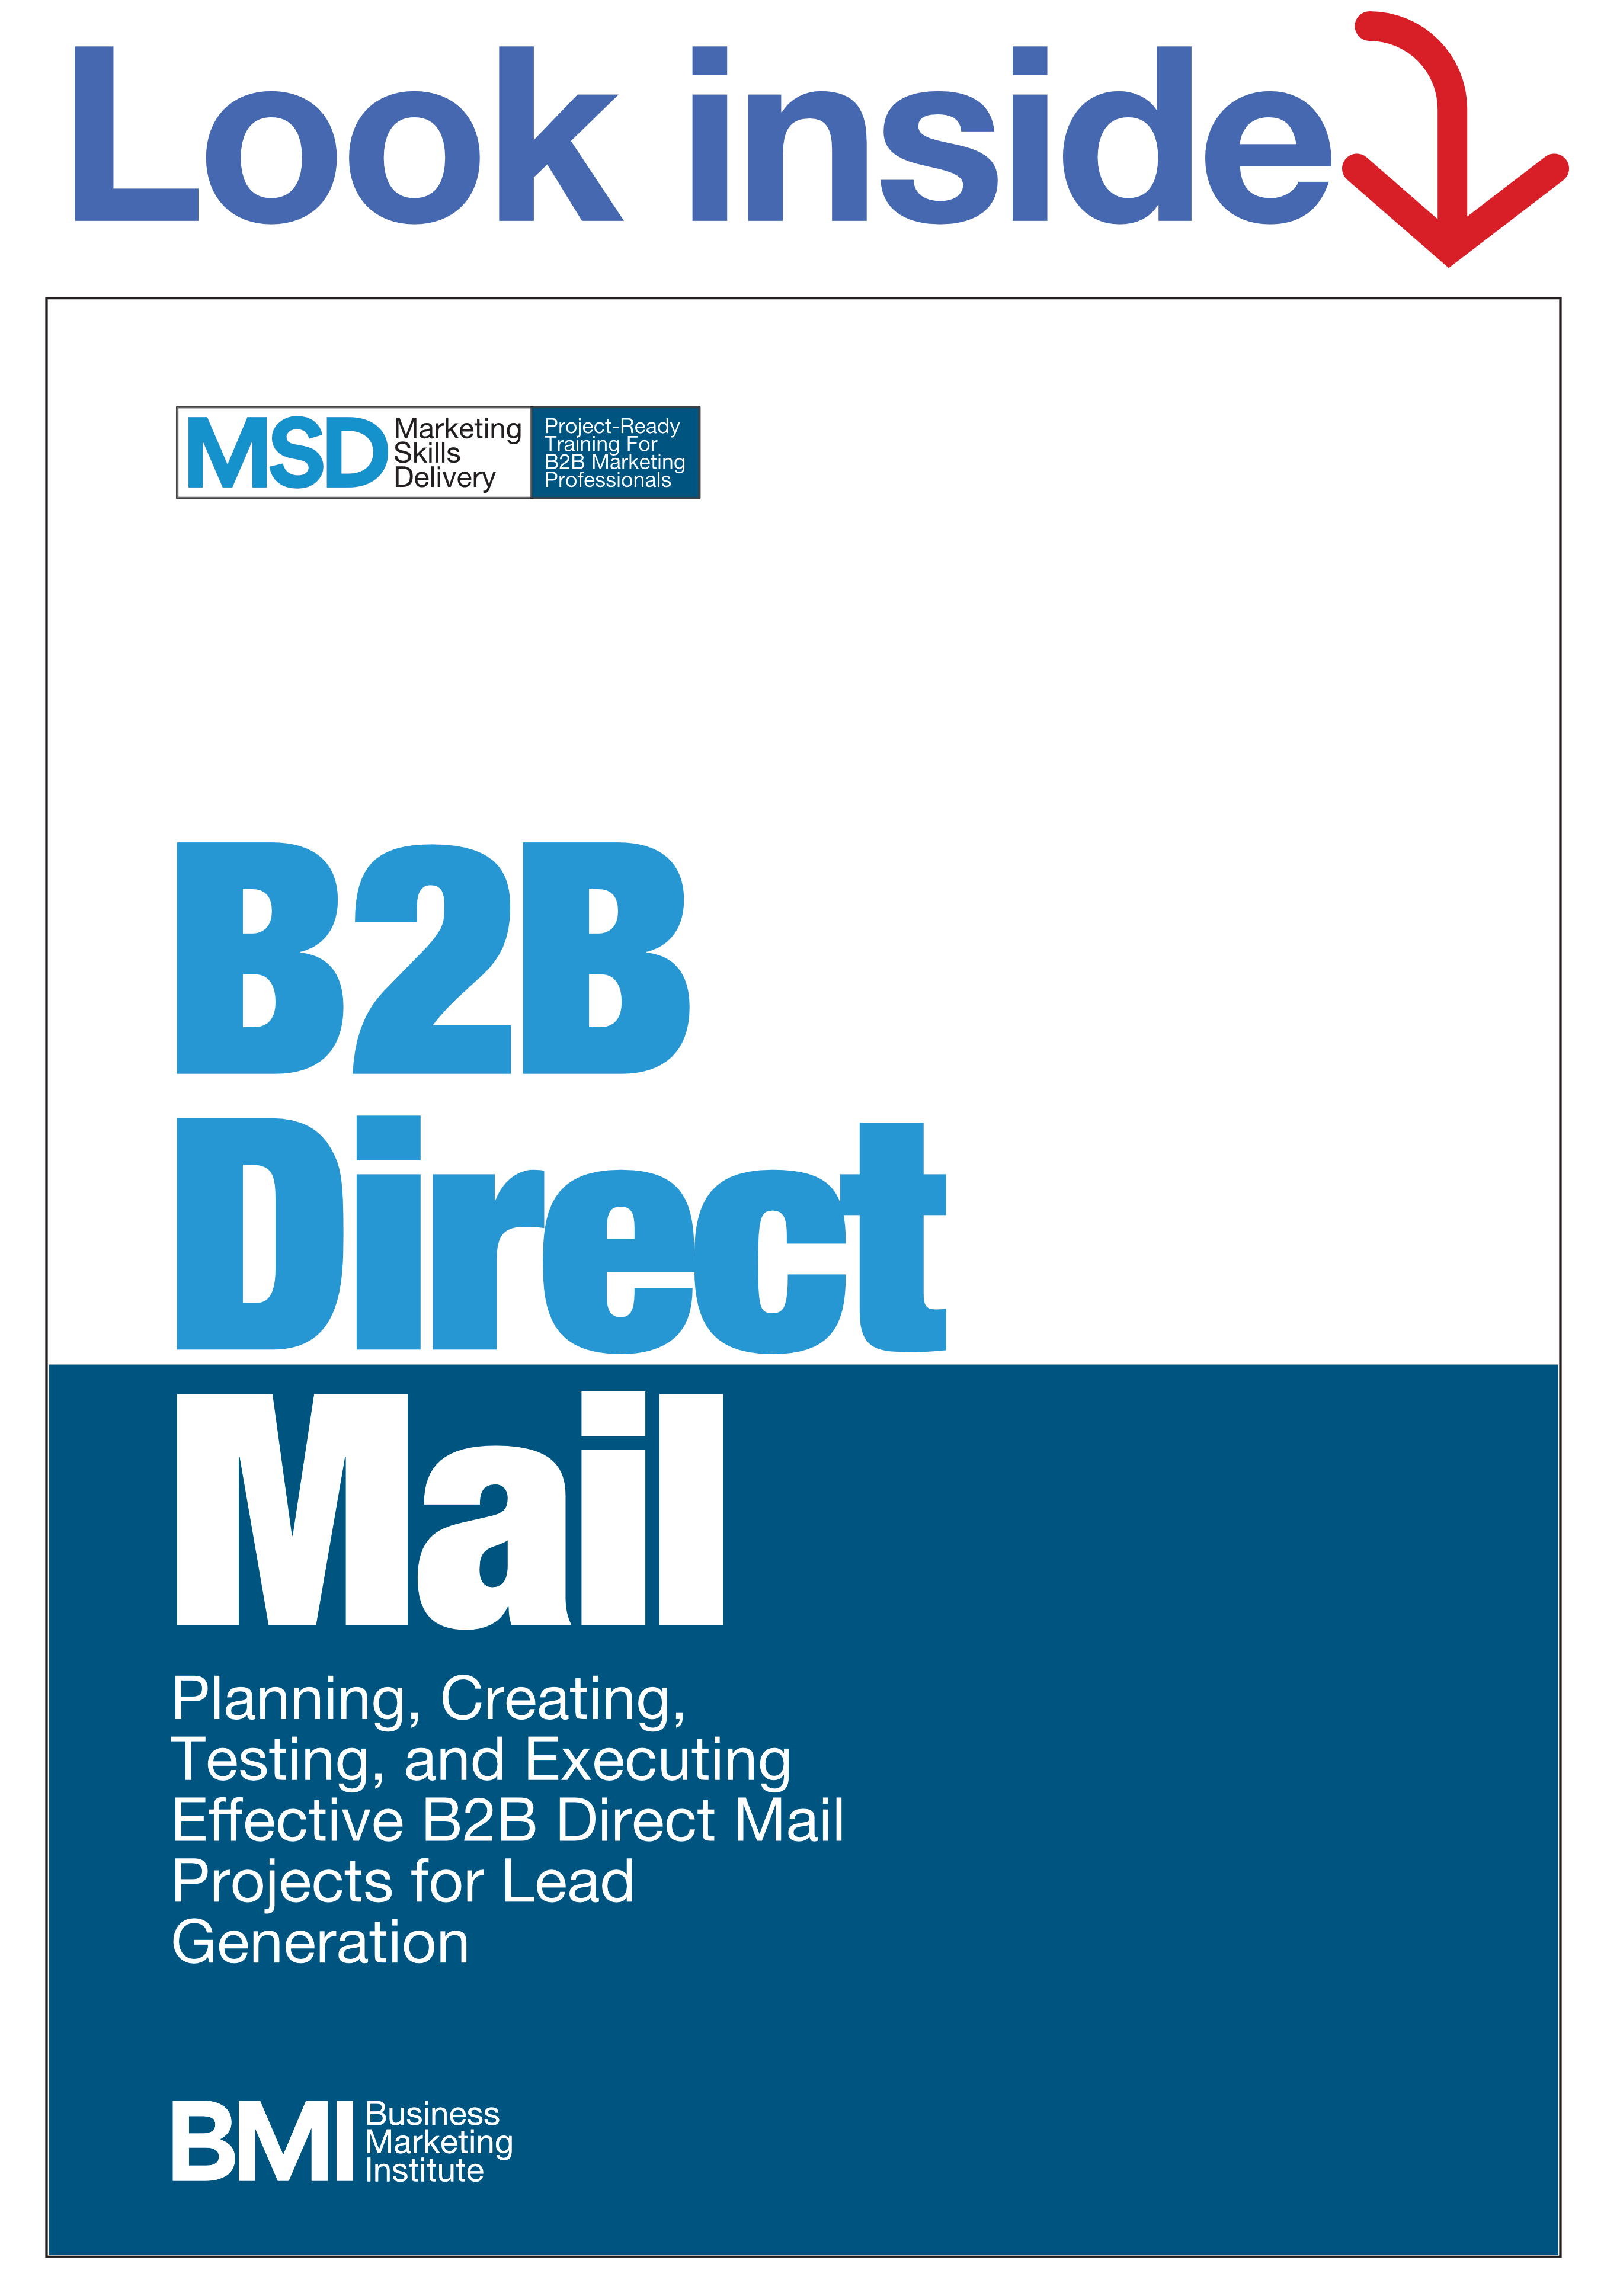 MSD44 Direct Mail